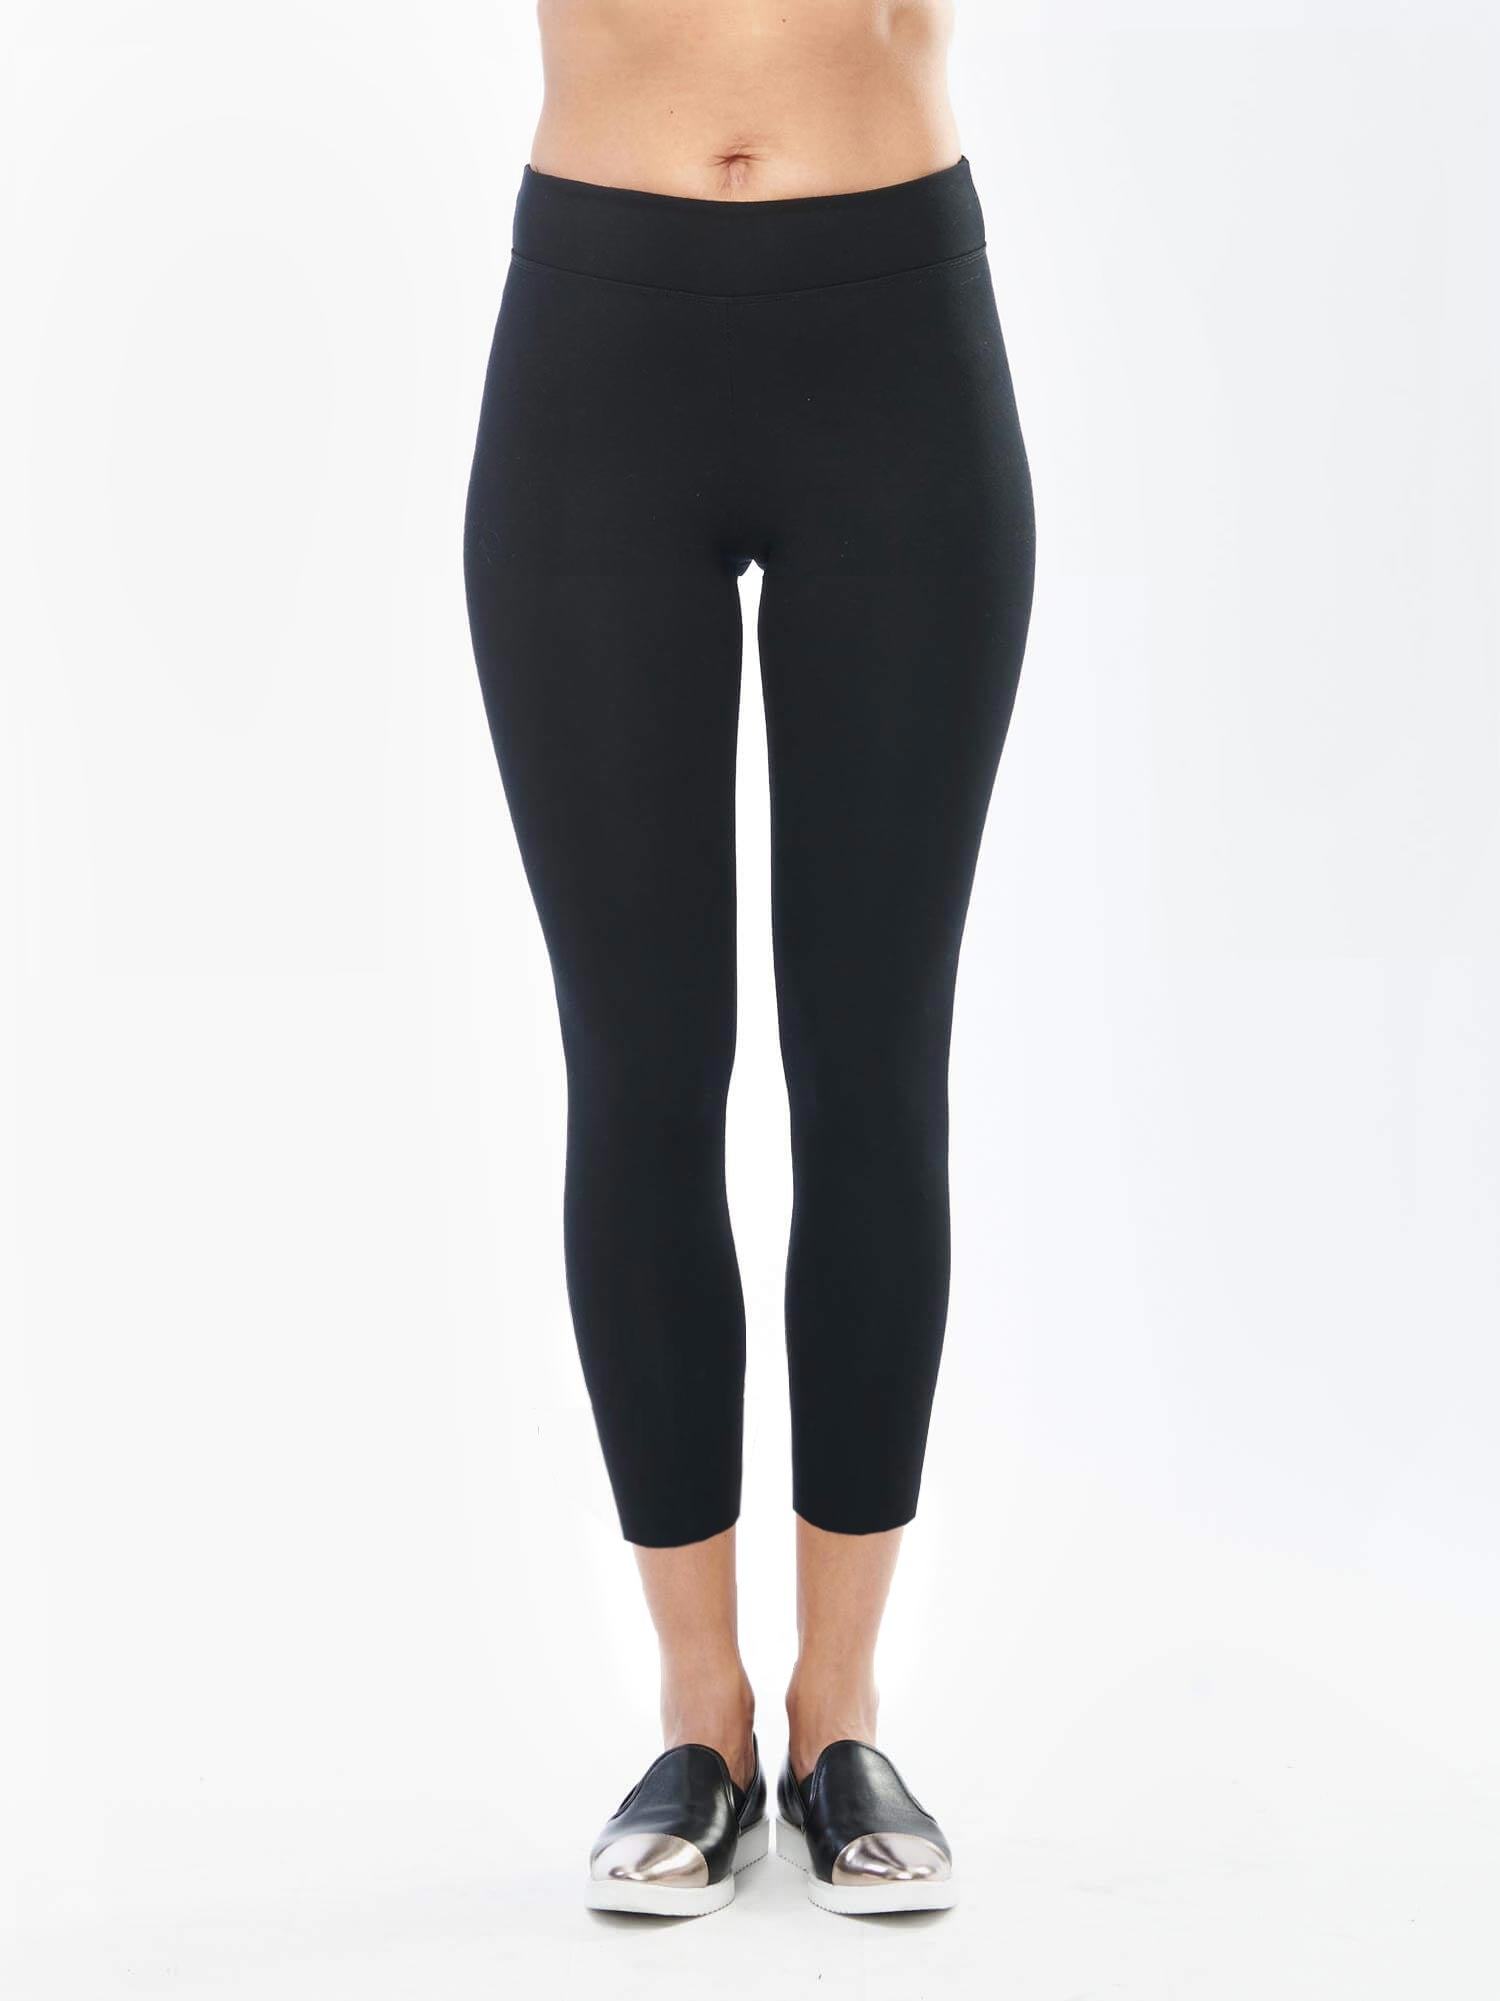 Lucy mid-rise capri legging, Canadian-made women's clothing